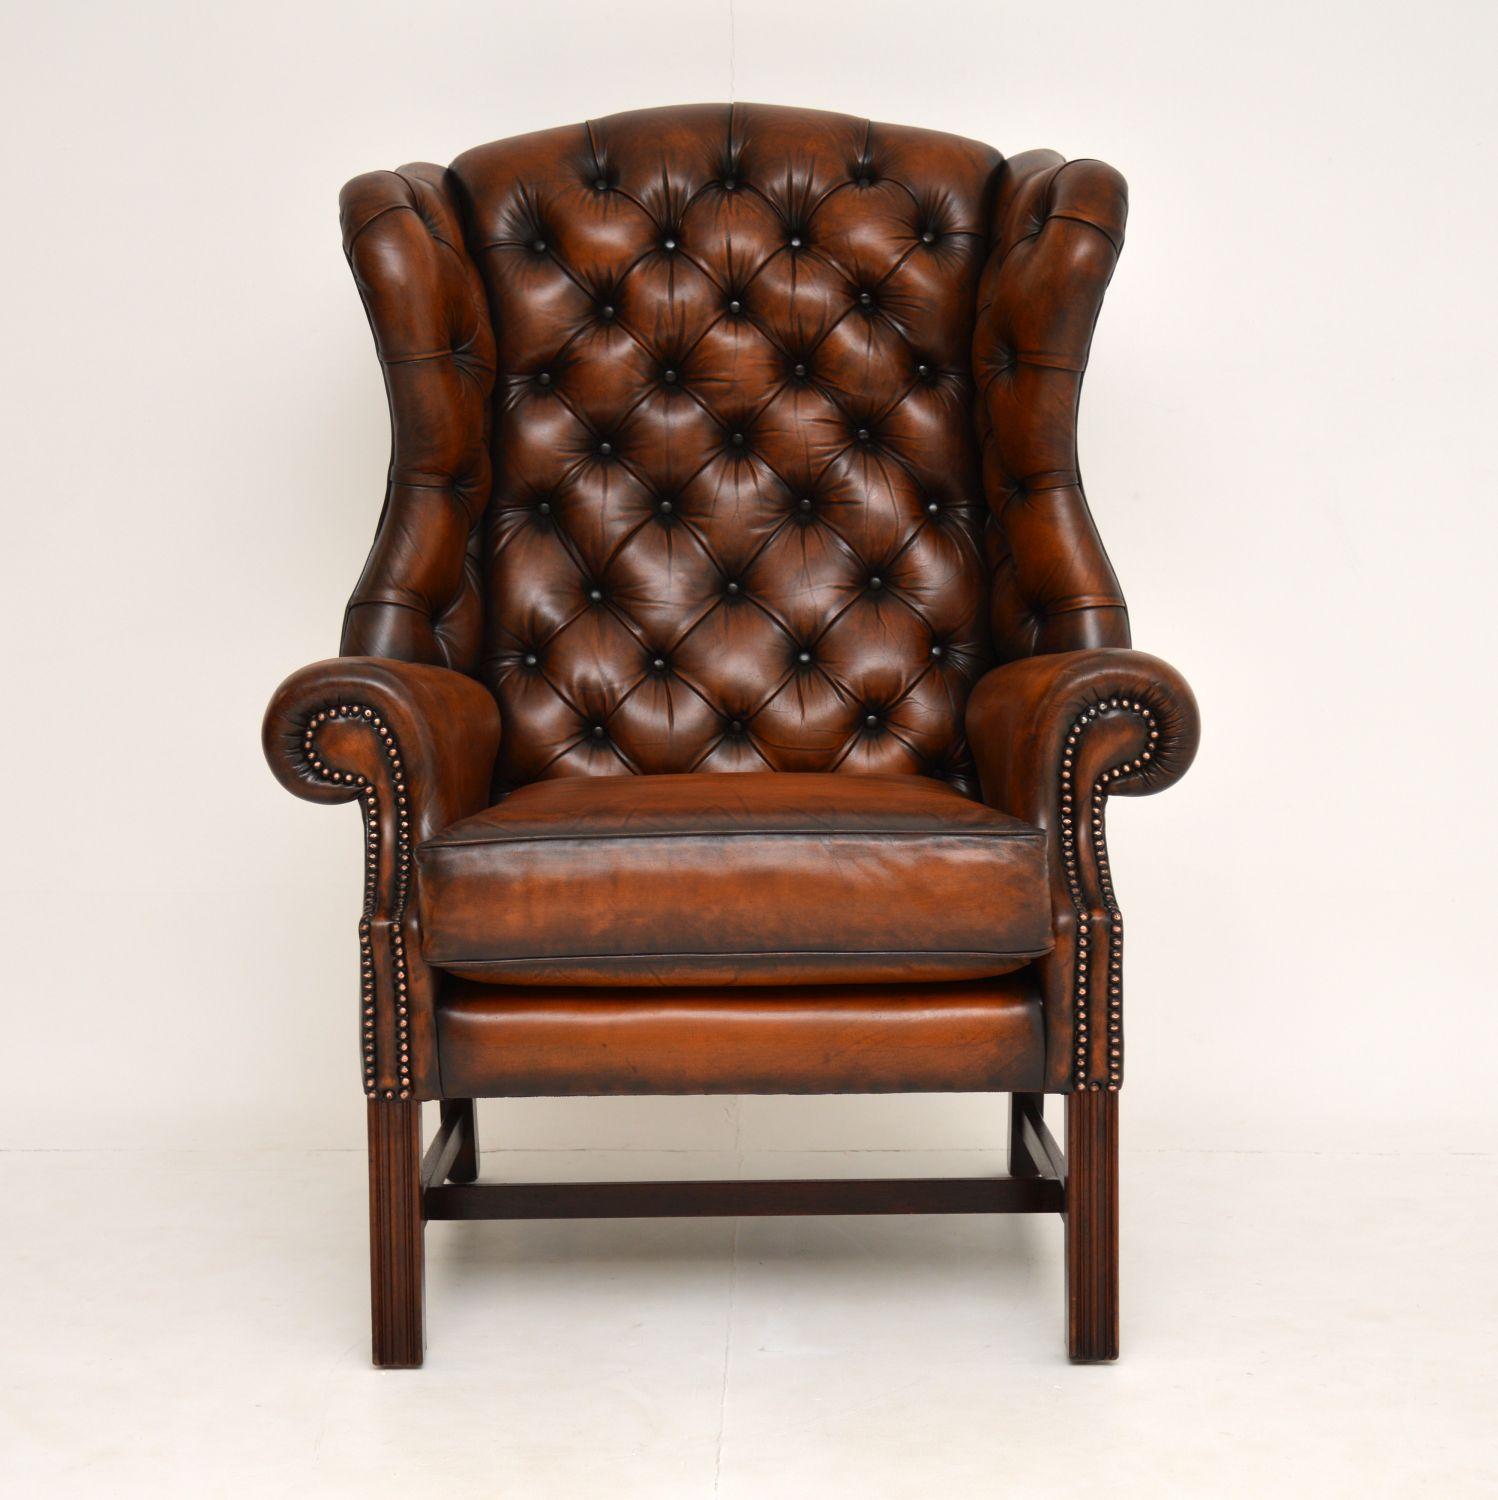 A handsome and extremely comfortable leather wingback armchair in the antique Georgian style. It’s of very large proportions, and is a great chair to sink back into. This is of superb quality, it dates from circa 1950s.

We have had this